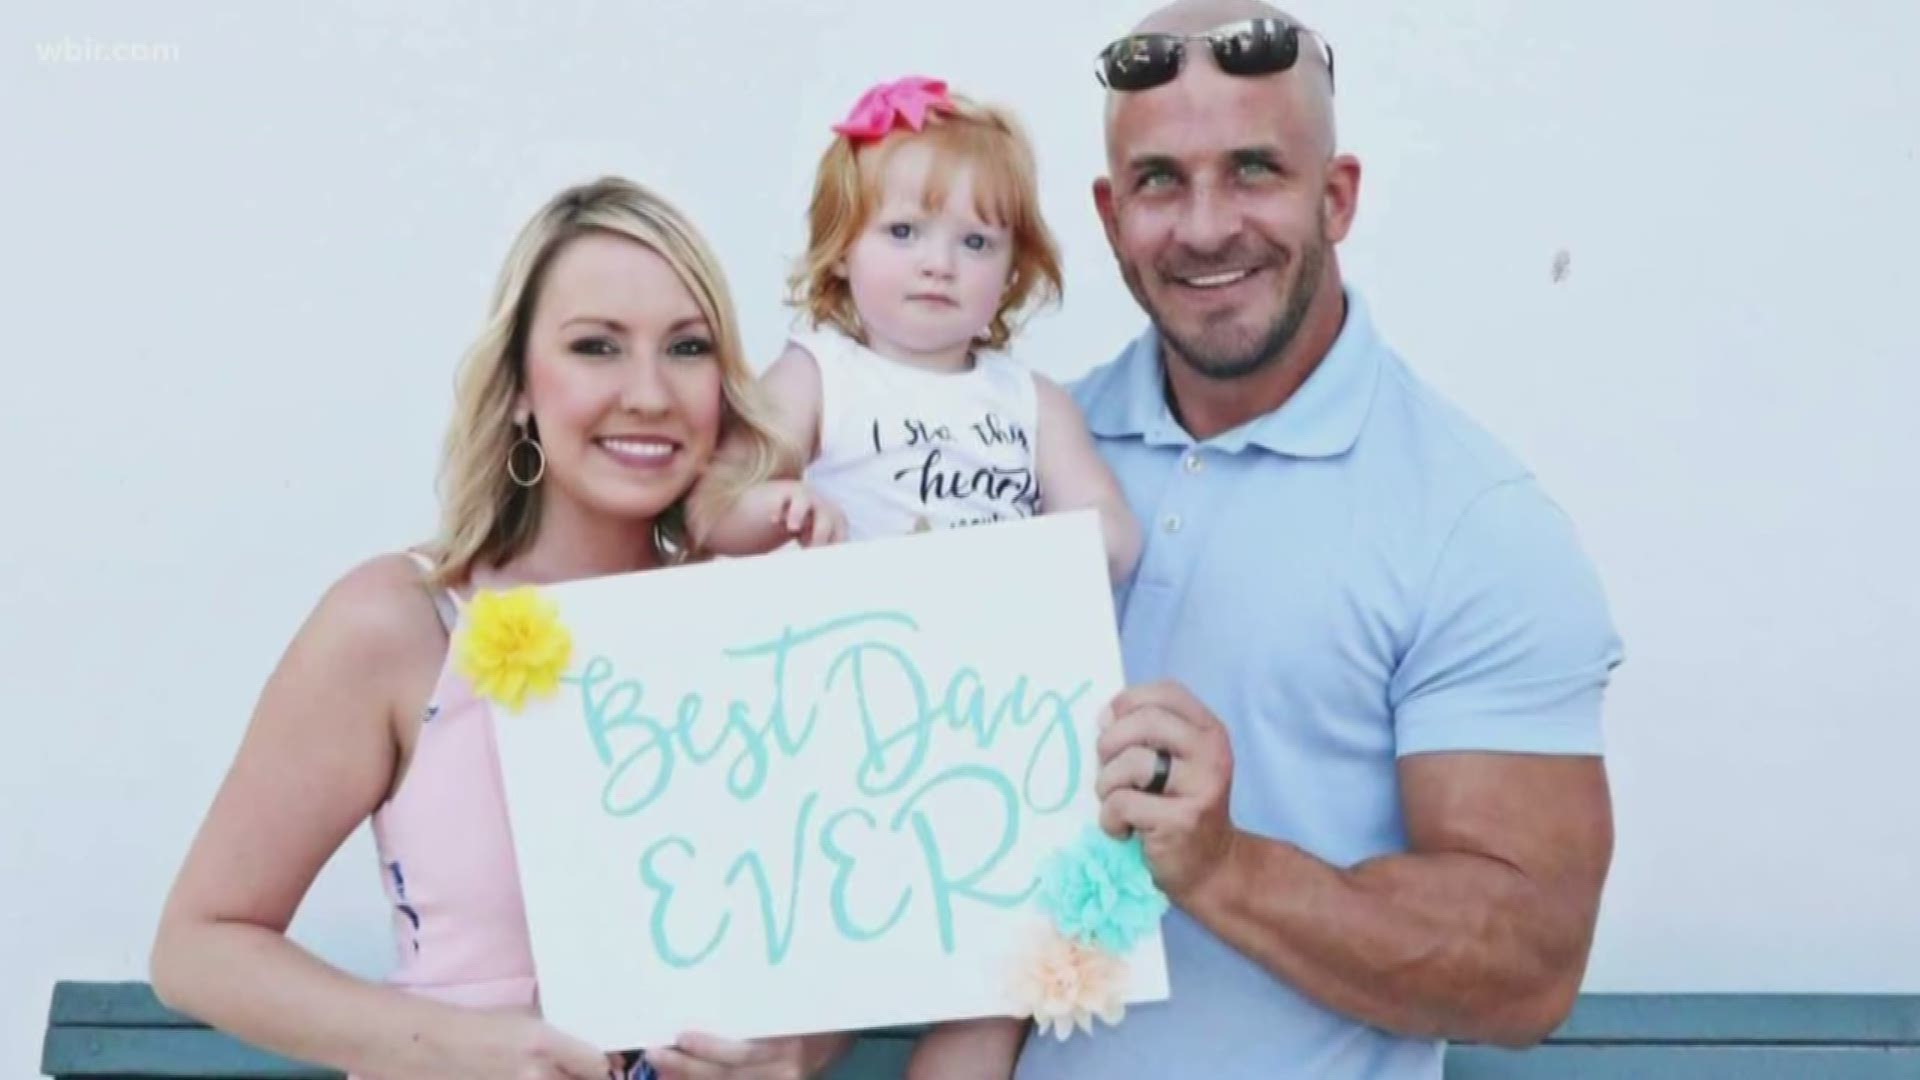 Alex Brinson helps families with adoption proceedings, foster care and healthy living conditions. And just two weeks ago he helped a family through the adoption of a sweet baby girl who they say was once exposed to drugs.